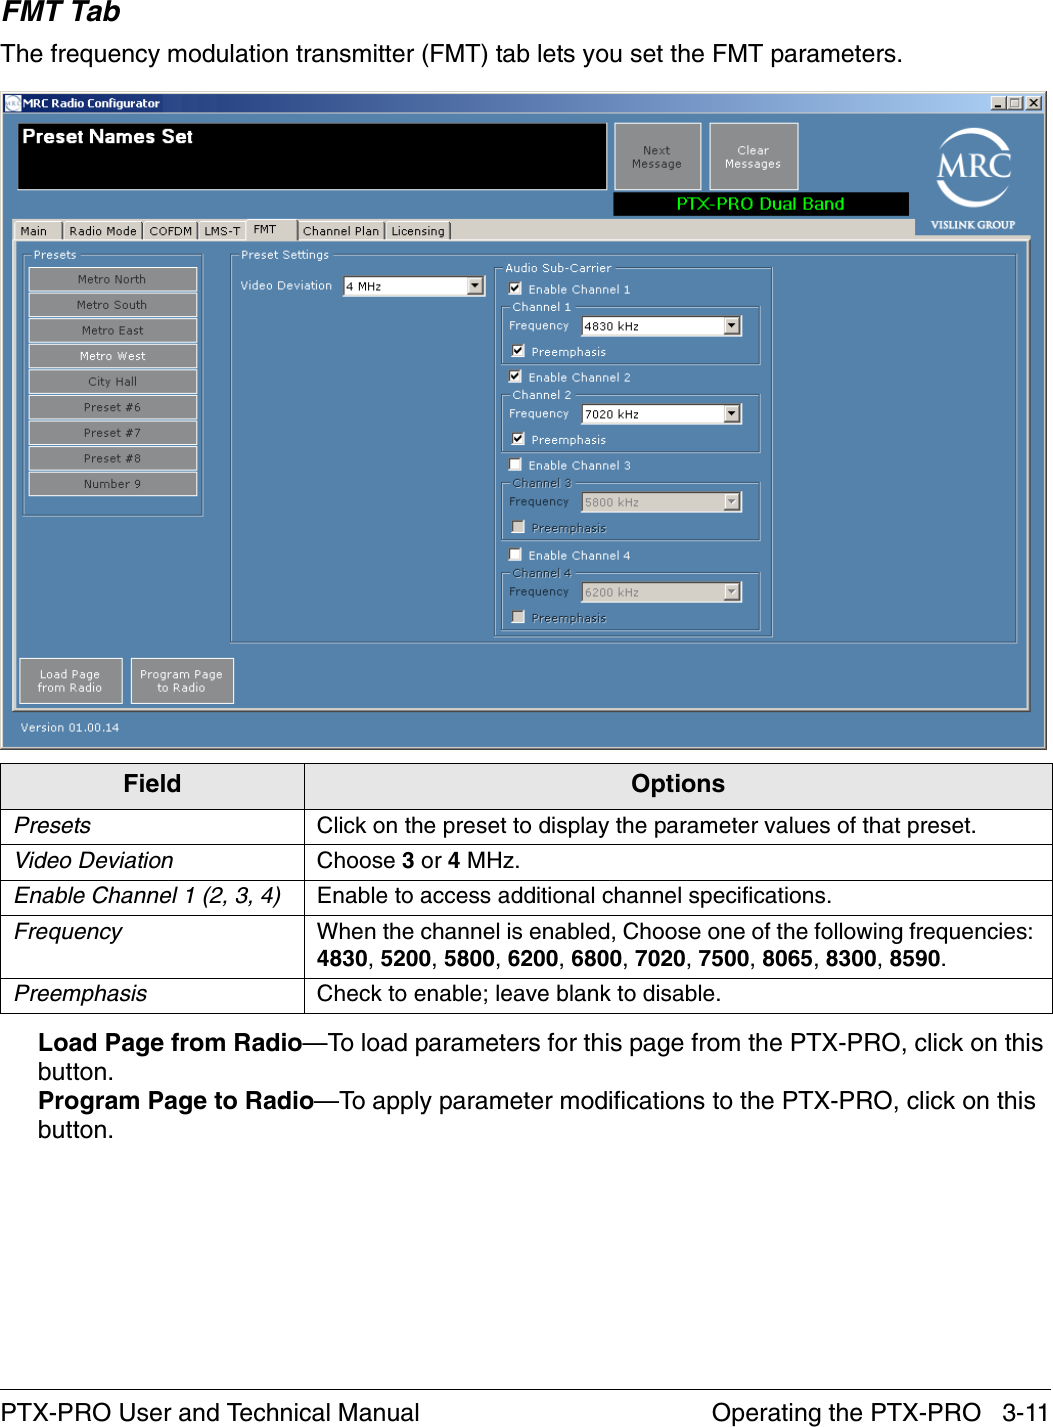 Operating the PTX-PRO   3-11PTX-PRO User and Technical ManualFMT TabThe frequency modulation transmitter (FMT) tab lets you set the FMT parameters.Load Page from Radio—To load parameters for this page from the PTX-PRO, click on this button.Program Page to Radio—To apply parameter modifications to the PTX-PRO, click on this button.Field OptionsPresets Click on the preset to display the parameter values of that preset.Video Deviation Choose 3 or 4 MHz.Enable Channel 1 (2, 3, 4) Enable to access additional channel specifications.Frequency When the channel is enabled, Choose one of the following frequencies: 4830, 5200, 5800, 6200, 6800, 7020, 7500, 8065, 8300, 8590.Preemphasis Check to enable; leave blank to disable.